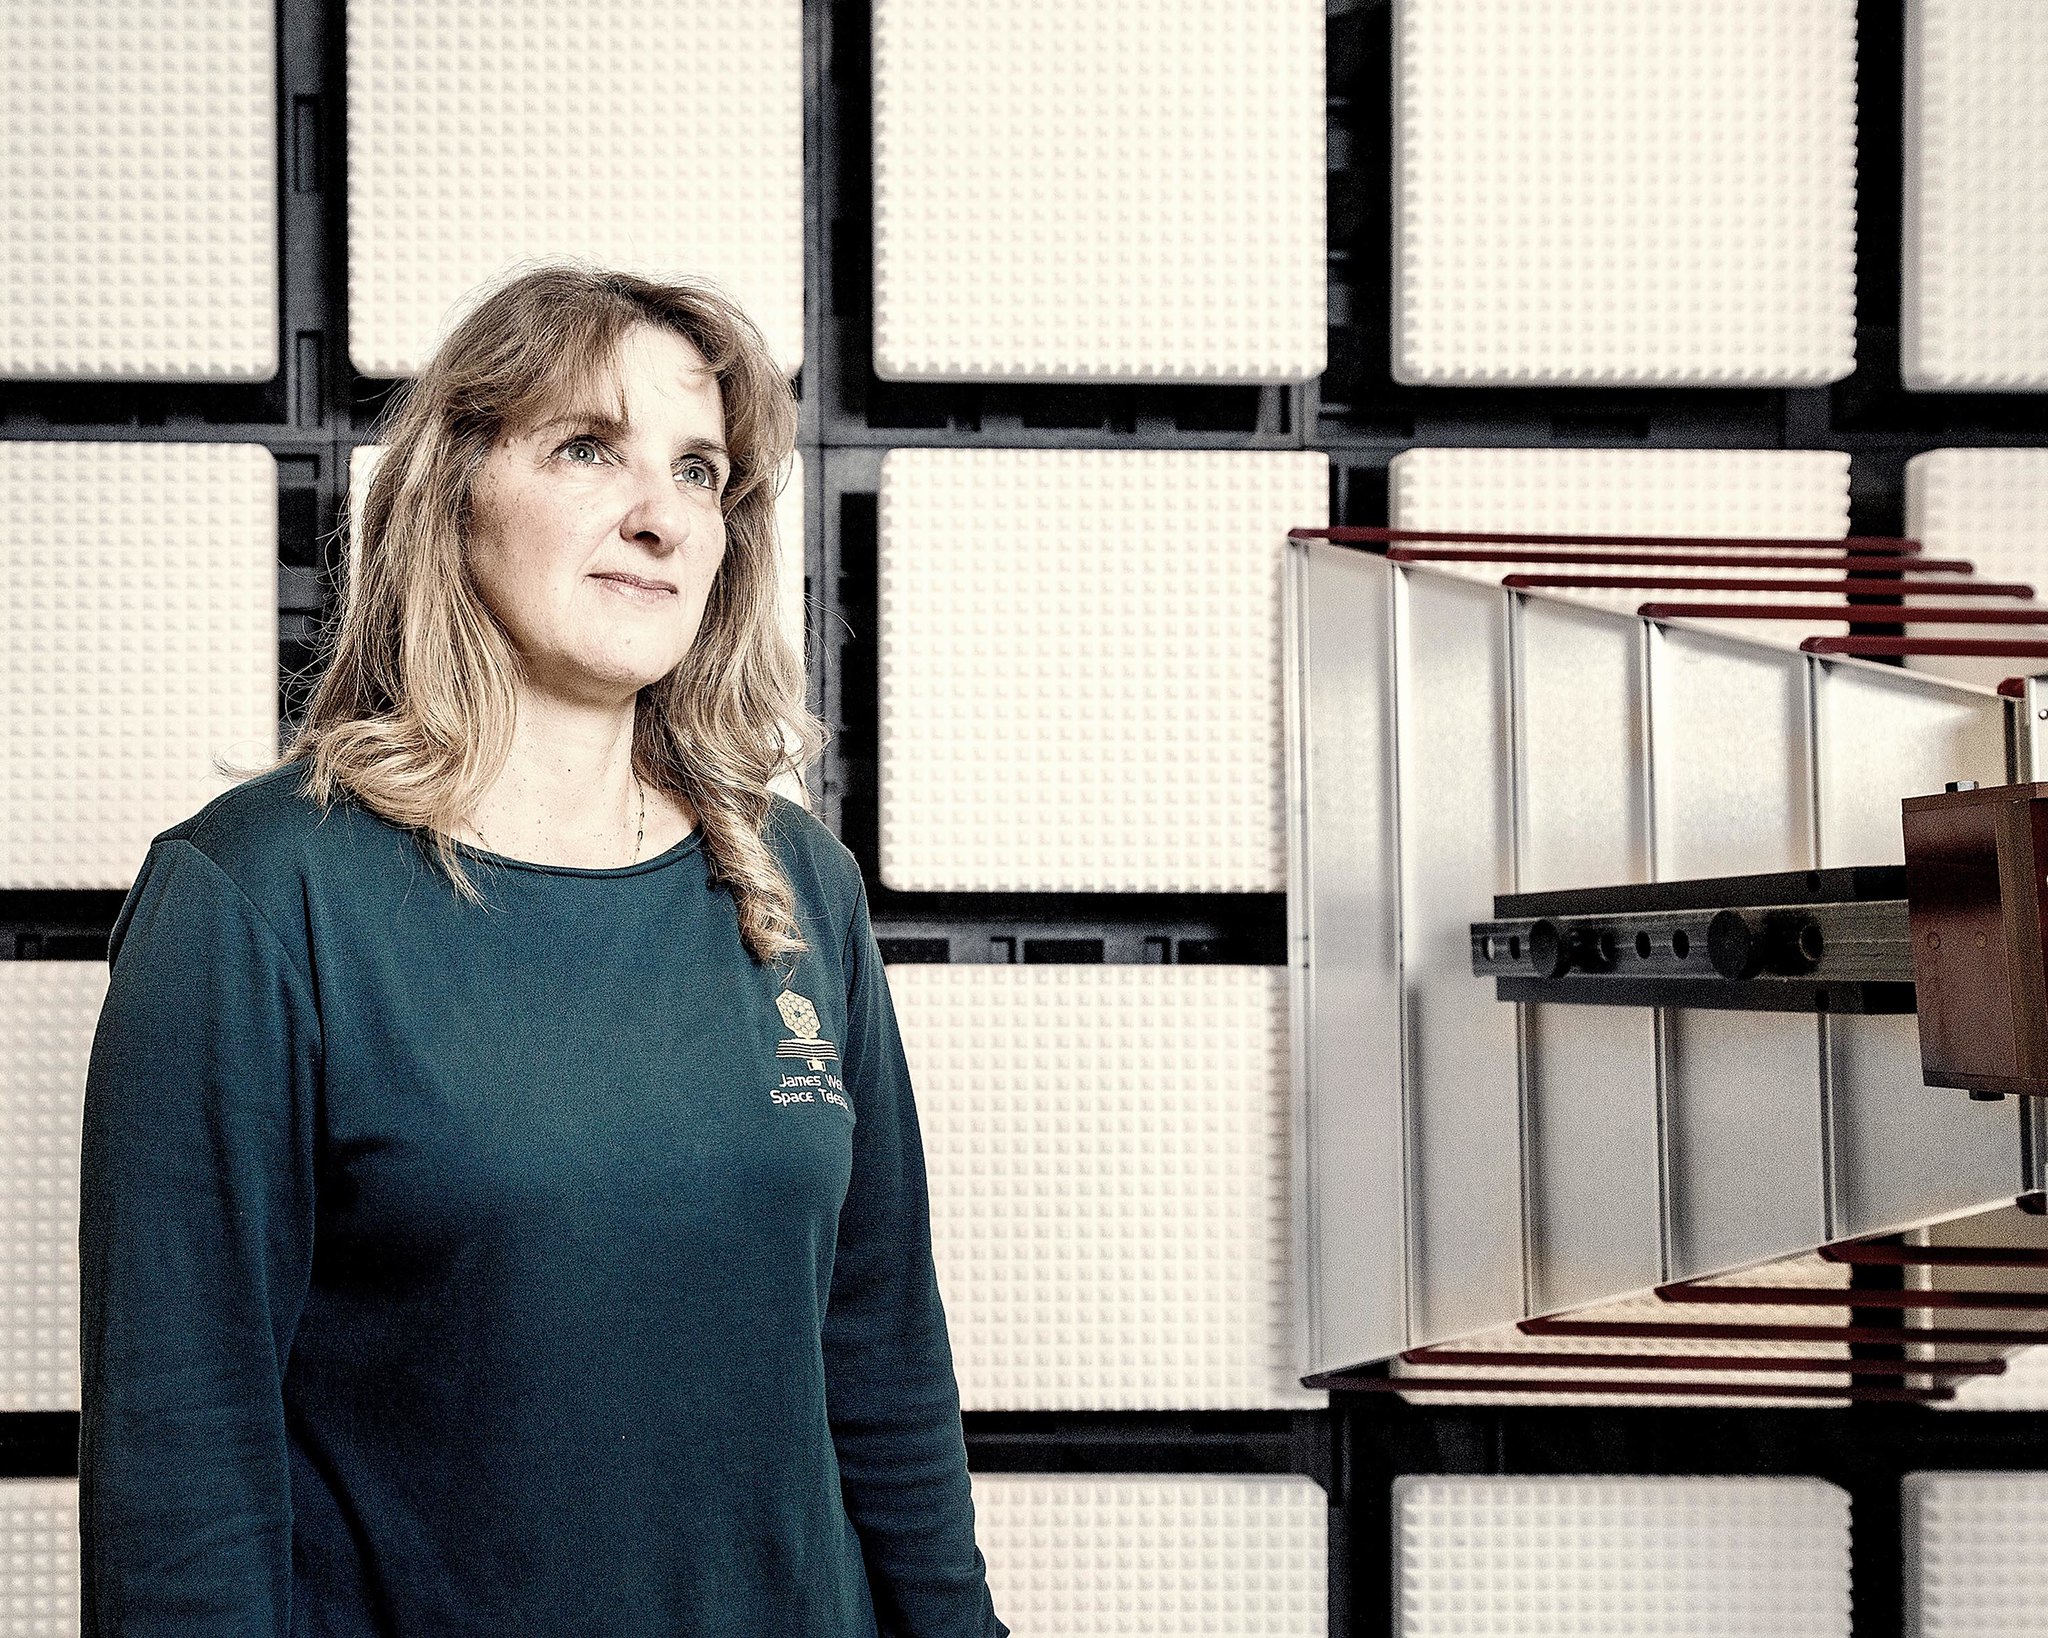 A woman with brown shoulder length hair wears a teal shirt with the Webb telescope logo on the left looks off camera in a portait. The background is a grid of 4x4 blocks.